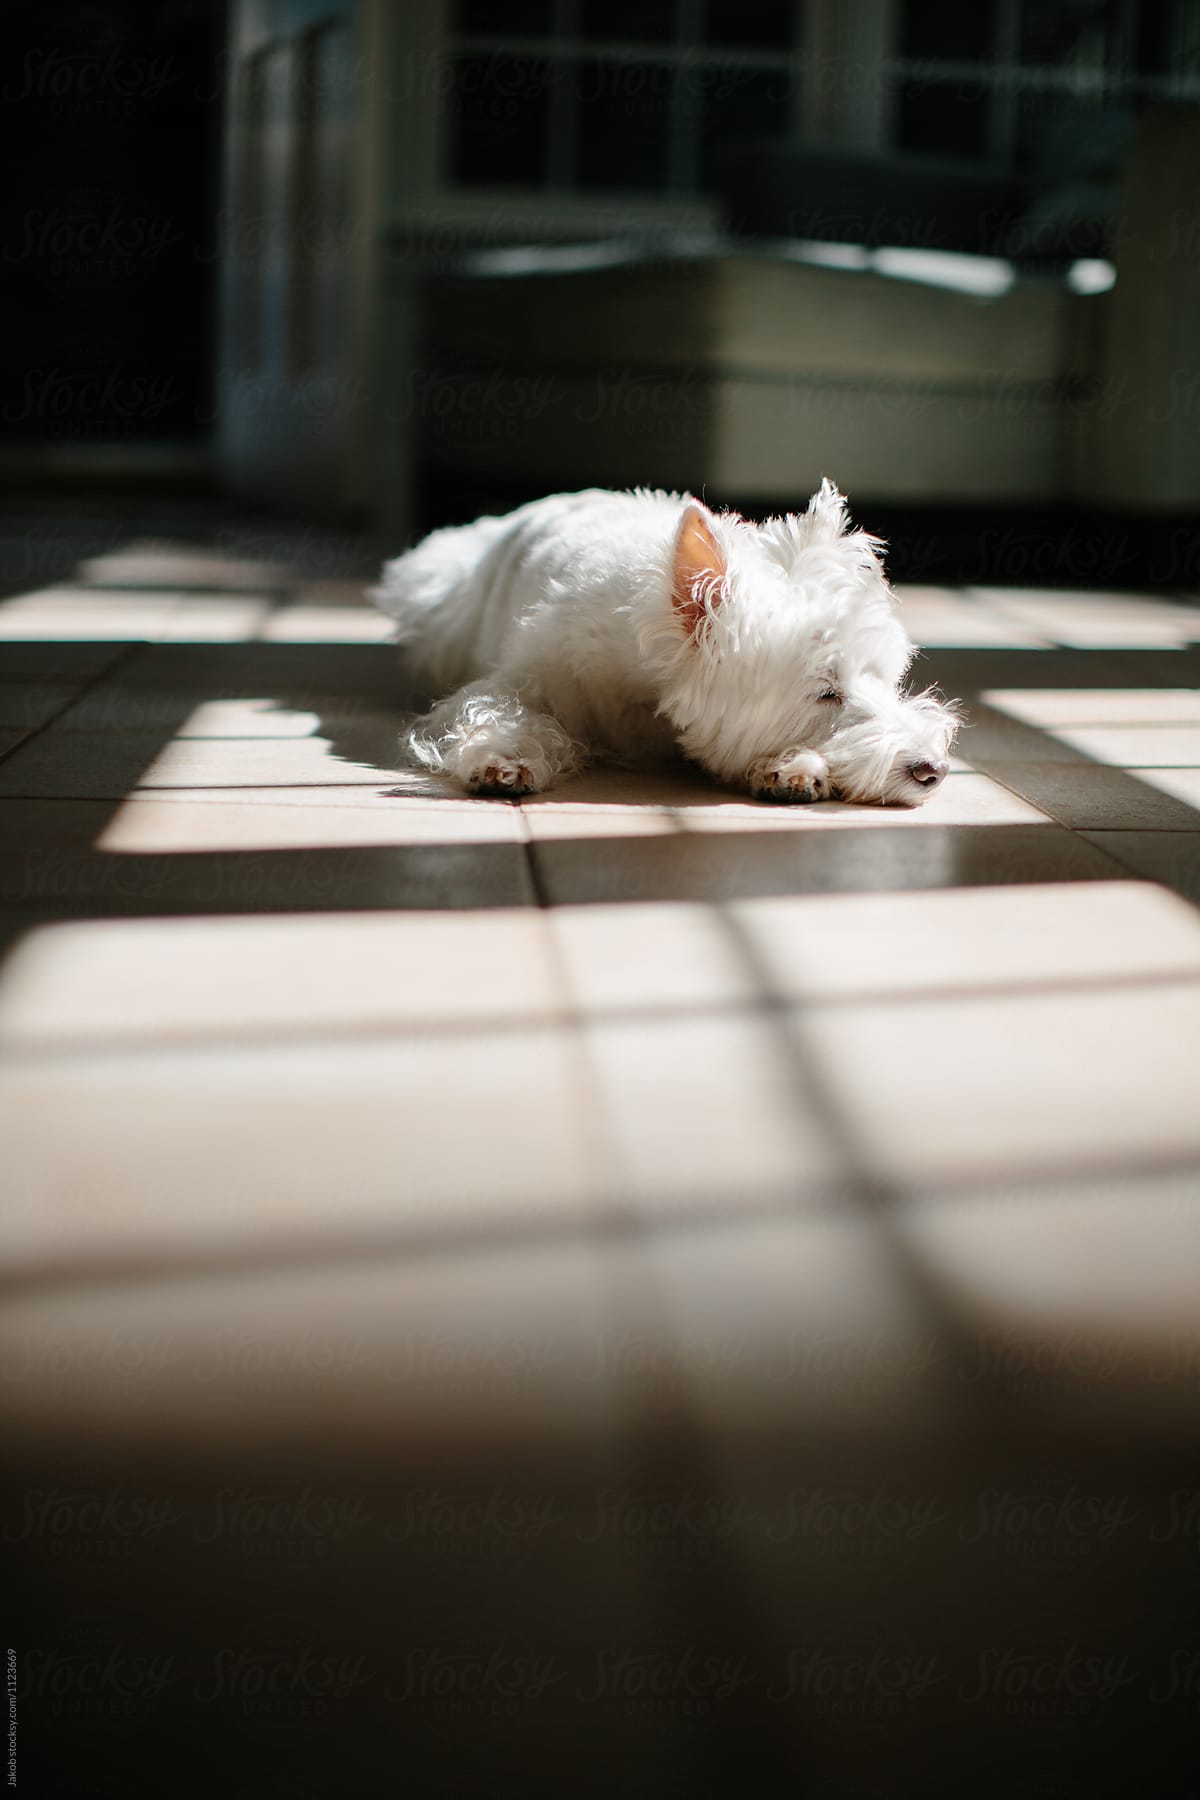 Cute white dog lying on kitchen floor among shadows from the sun